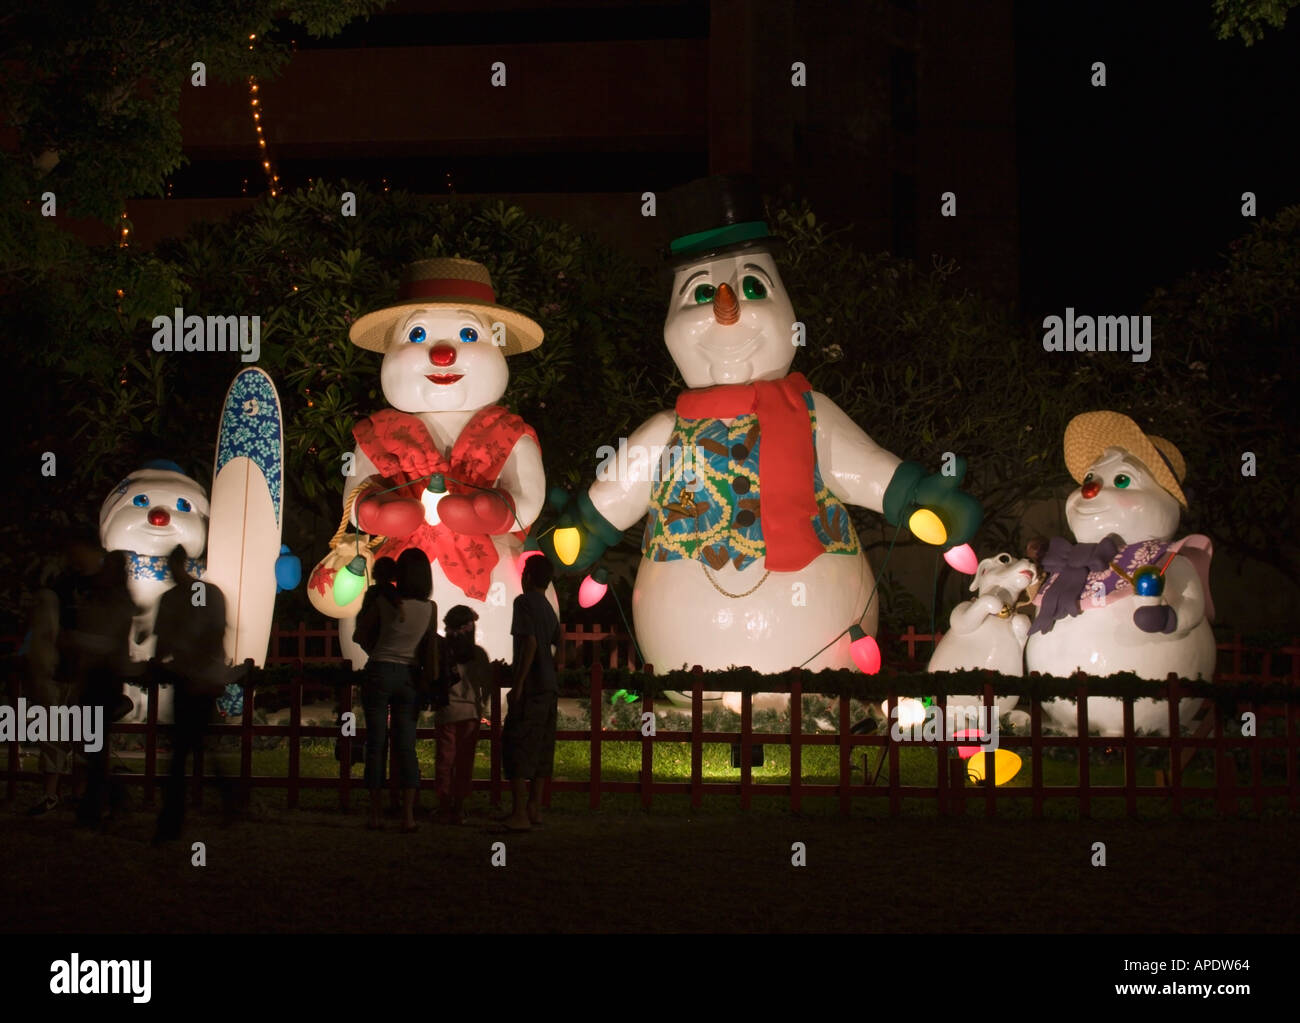 Four big toy model Christmas characters of a snowman family illuminated at night in central Honolulu Oahu Island Hawaii Stock Photo